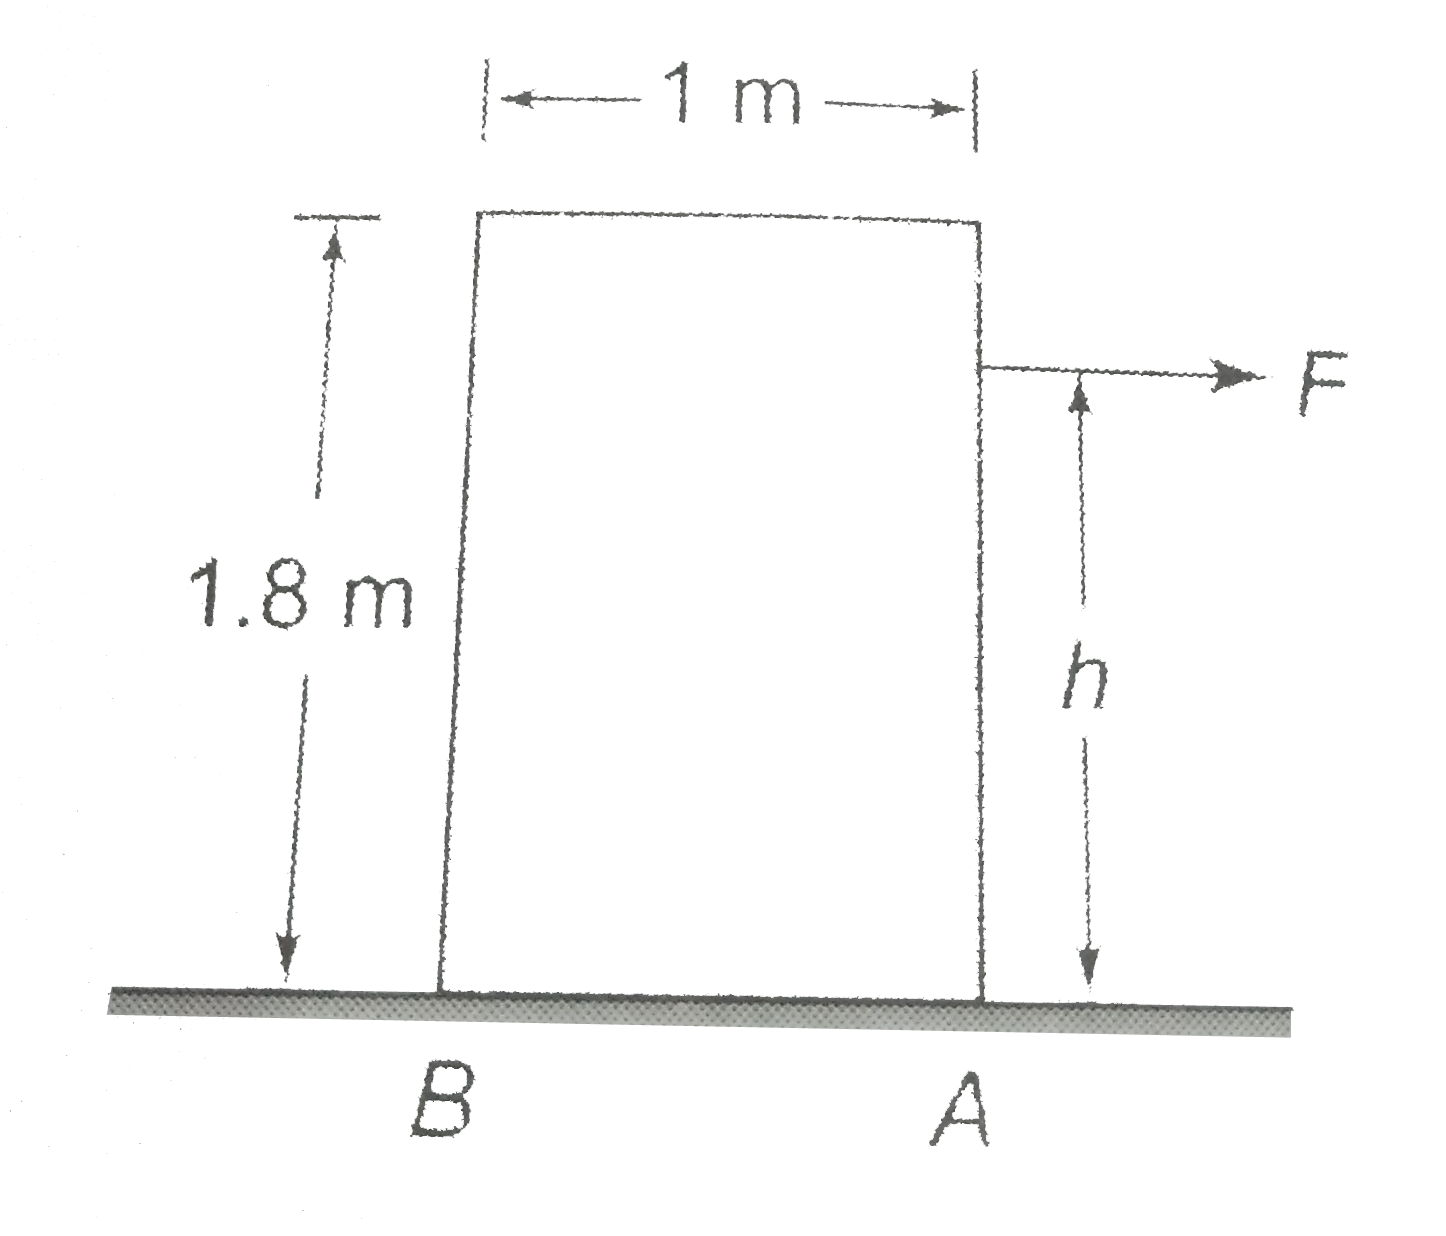 A rectangular block of square base (1 mxx1 m) and height 1.8 m is moving with constant speed on a rough horizontal surface (mu(k)=0.5) due to horizontal force F as shown. If the mass of block is 40 kg, find   (a) the value of F(1)   (b) the value of h at which the block just starts to tip   (c) If force F is applied at h//2, find the perpendicular distance of normal reaction from O (center of mass).